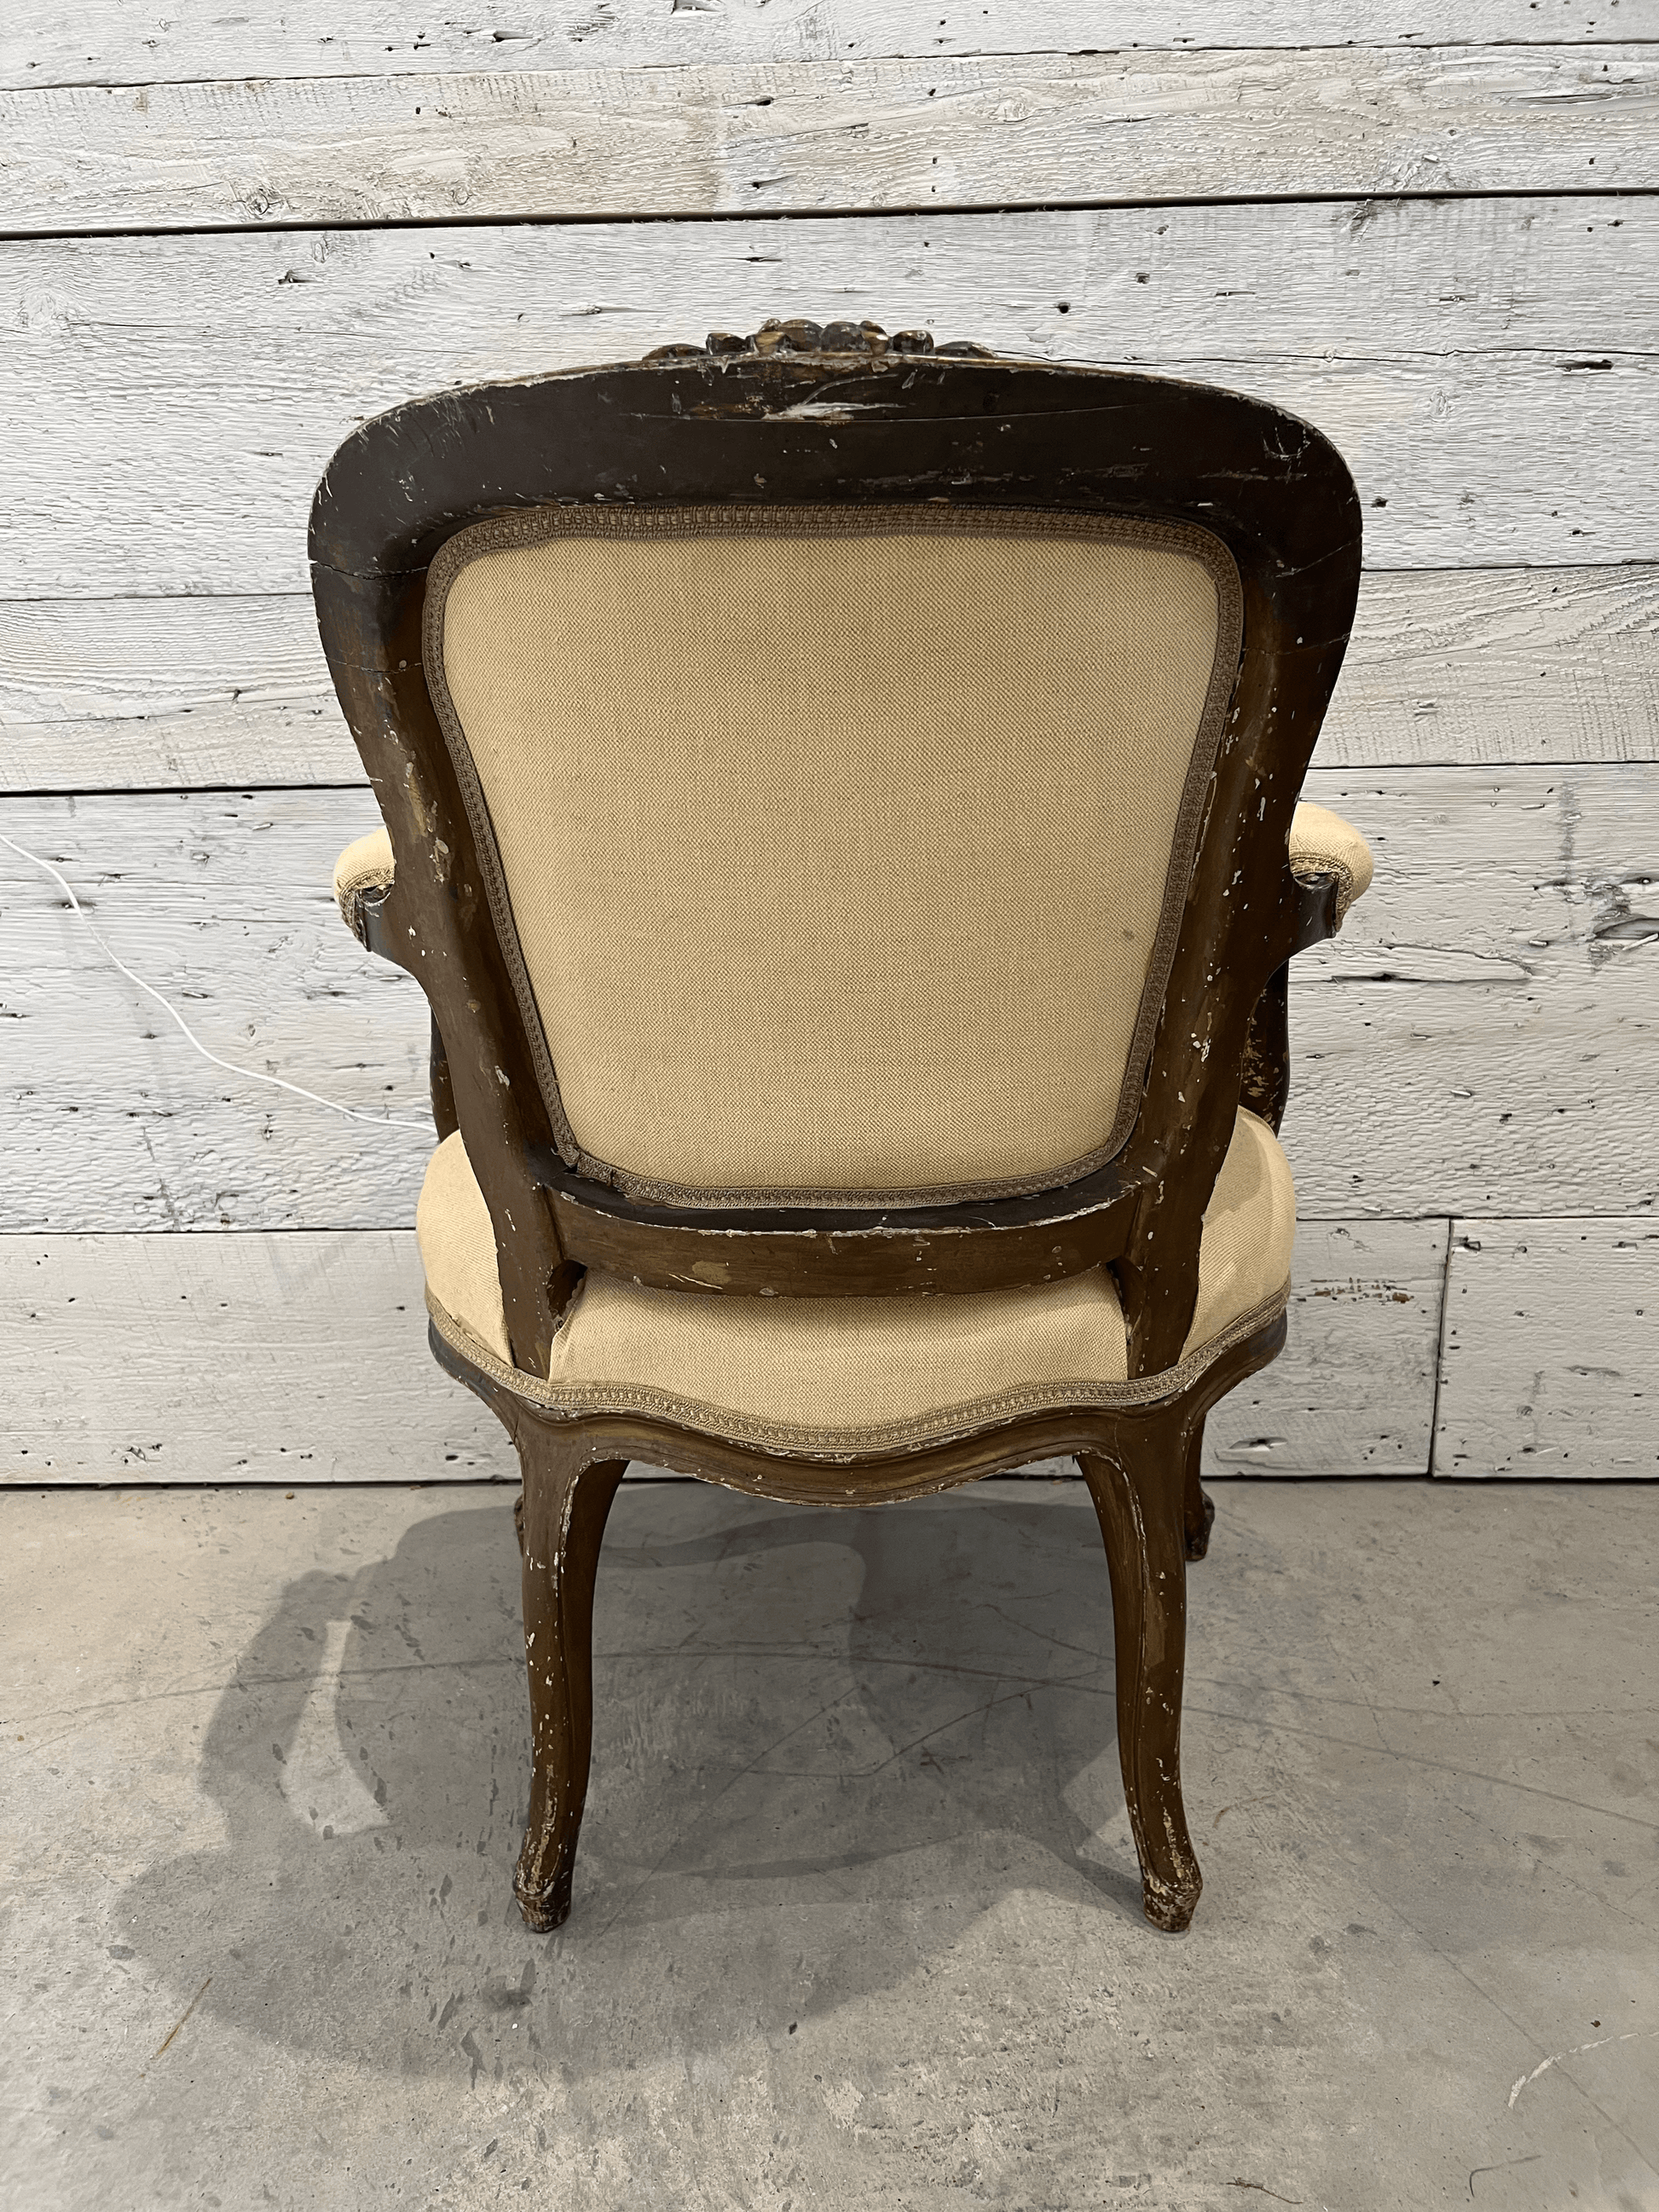 Early 20th Century Louis XV Walnut Fauteuil Arm Chairs - a Pair - The White Barn Antiques